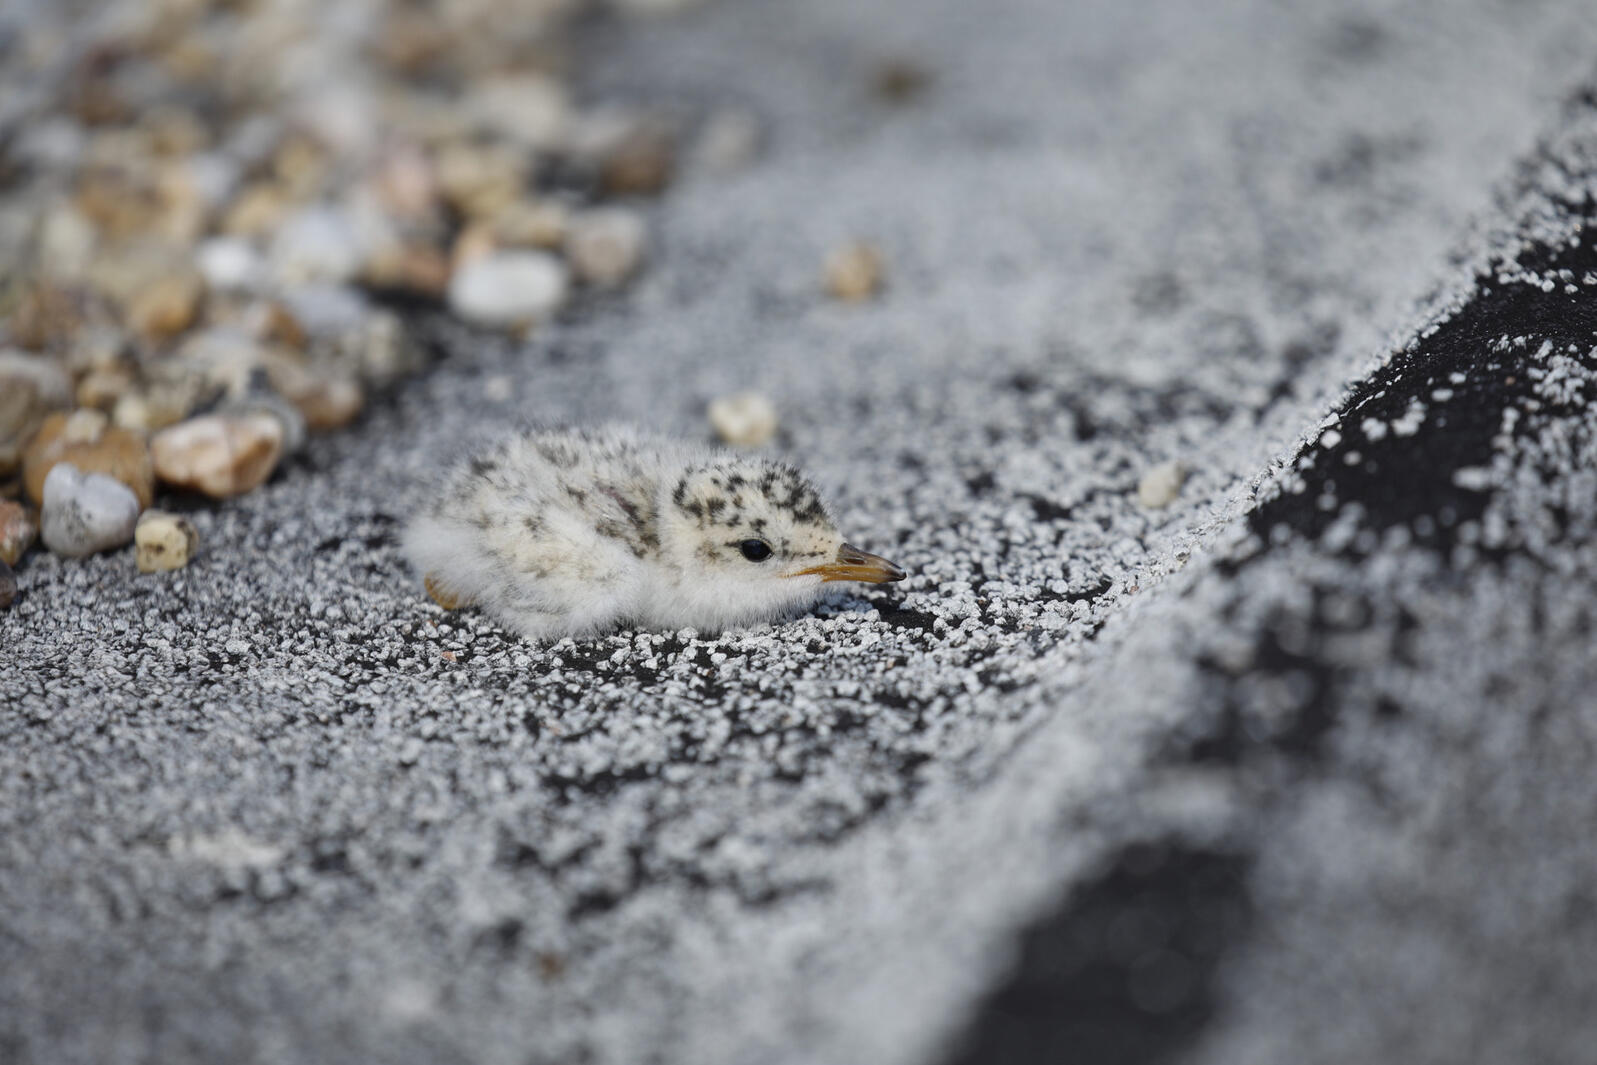 A Least Tern chick rests on a gravel rooftop. Though not ideal habitat, many gravel rooftop sites successfully fledged dozens of sea and shorebird chicks again this year. Photo taken with a telephoto lens with permission from the Florida Fish and Wildlife